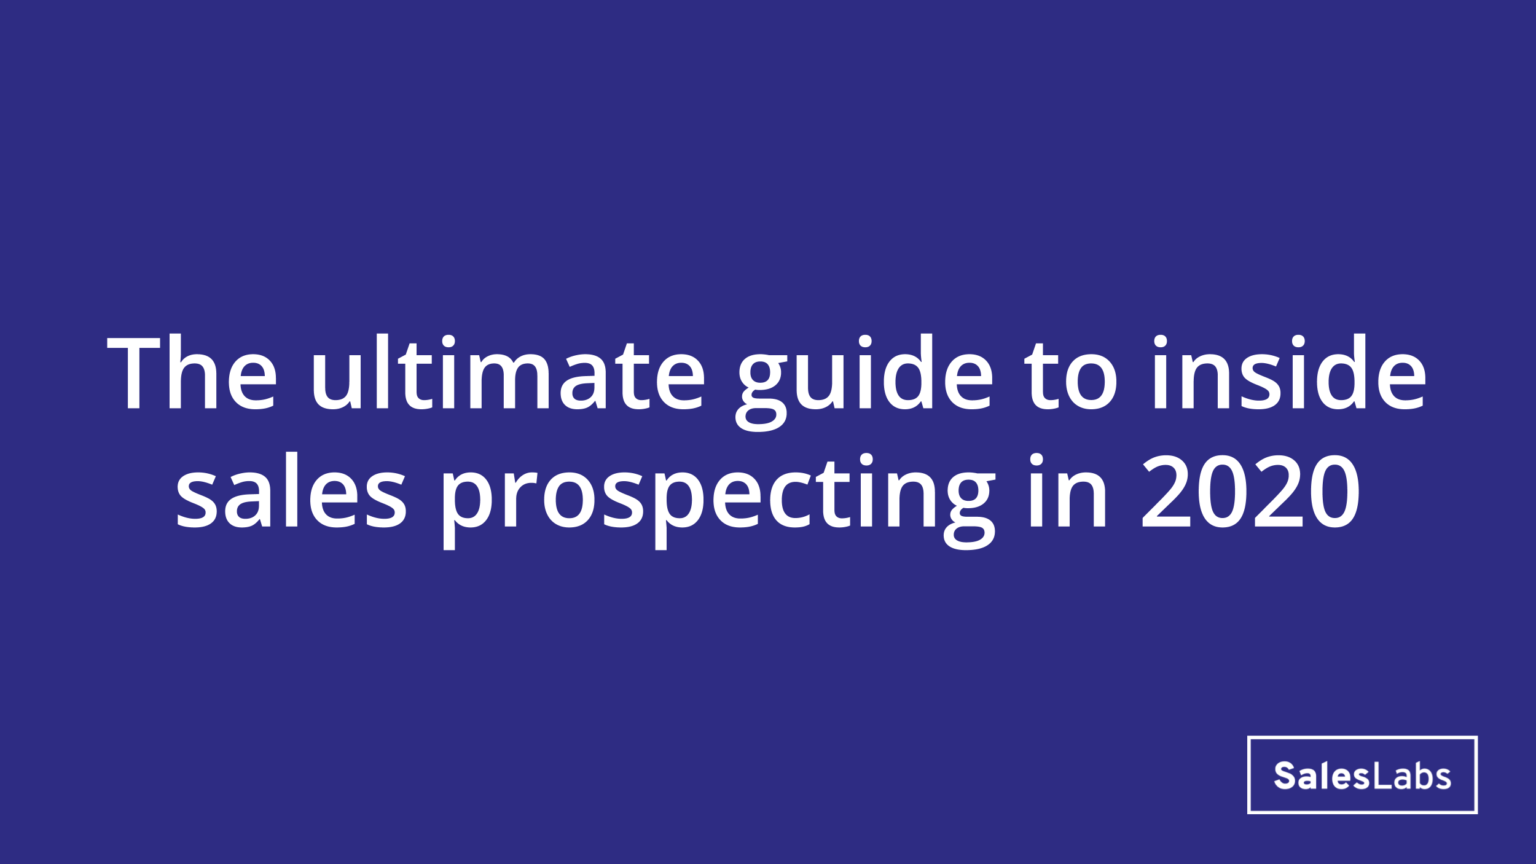 The ultimate guide to inside sales prospecting in 2020